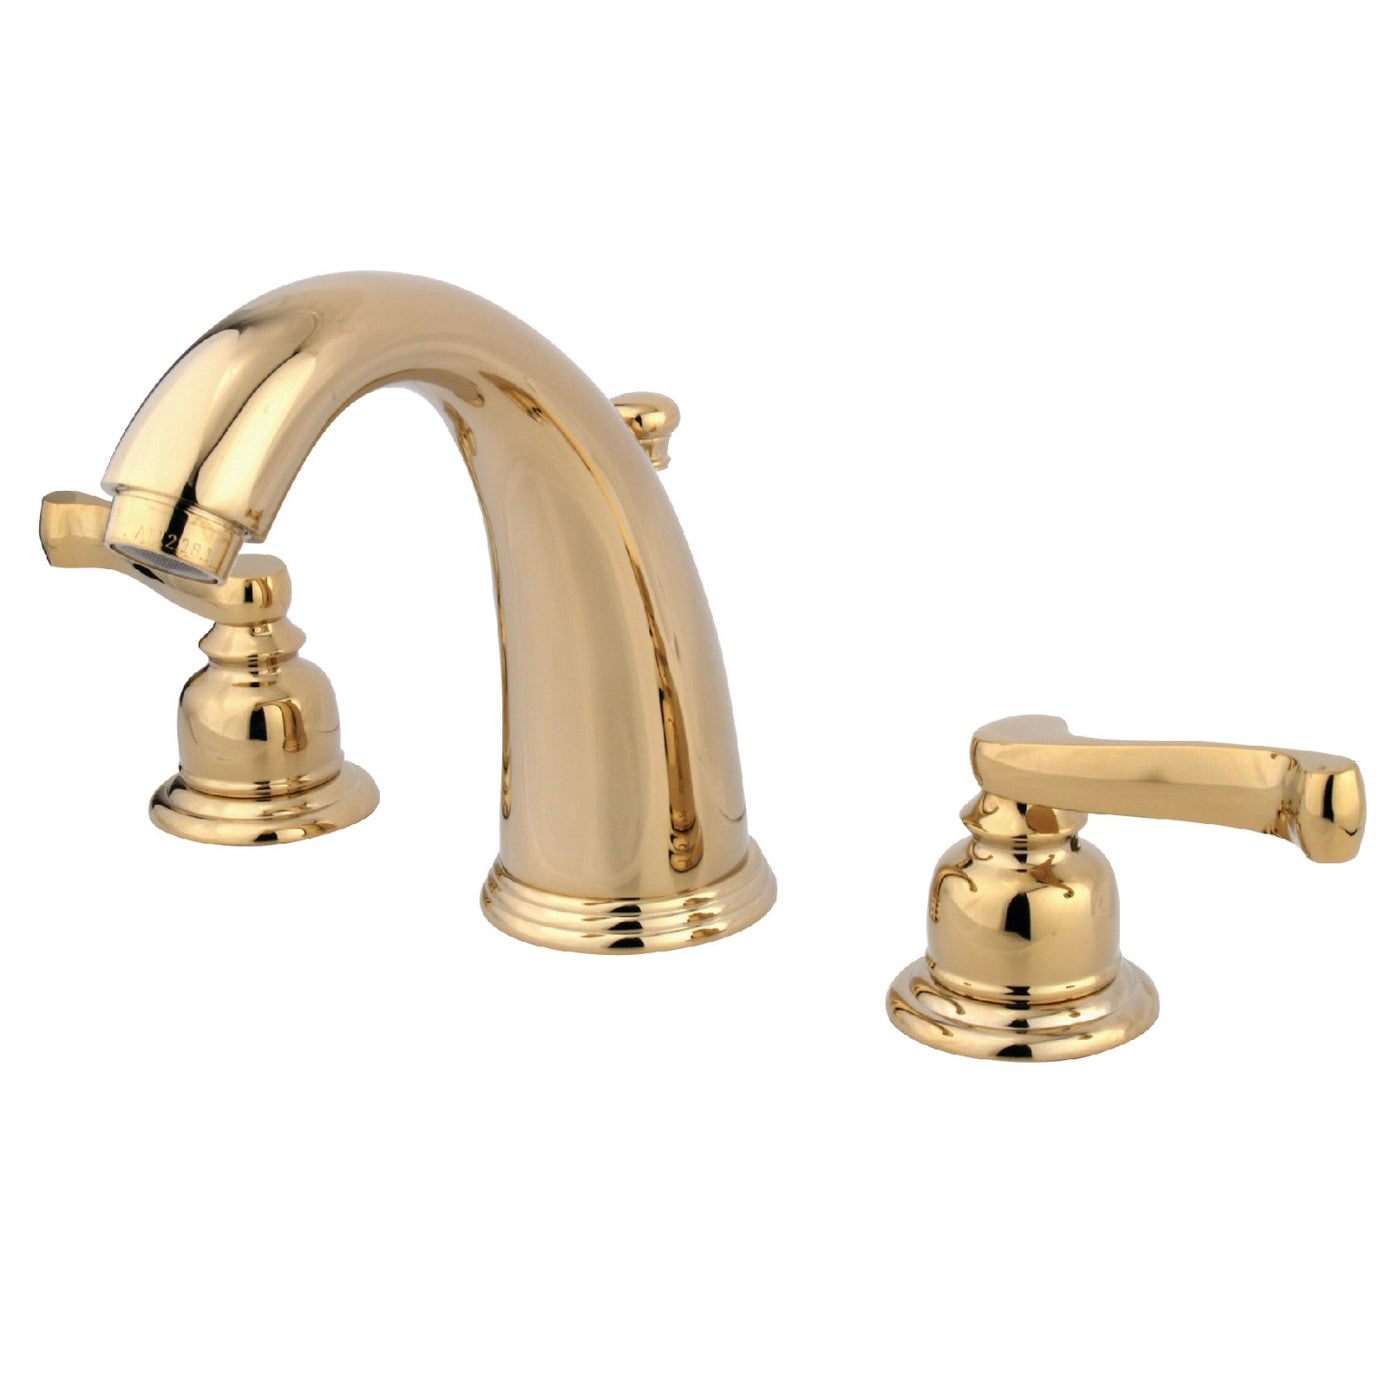 Elements of Design EB982FL Widespread Bathroom Faucet with Retail Pop-Up, Polished Brass